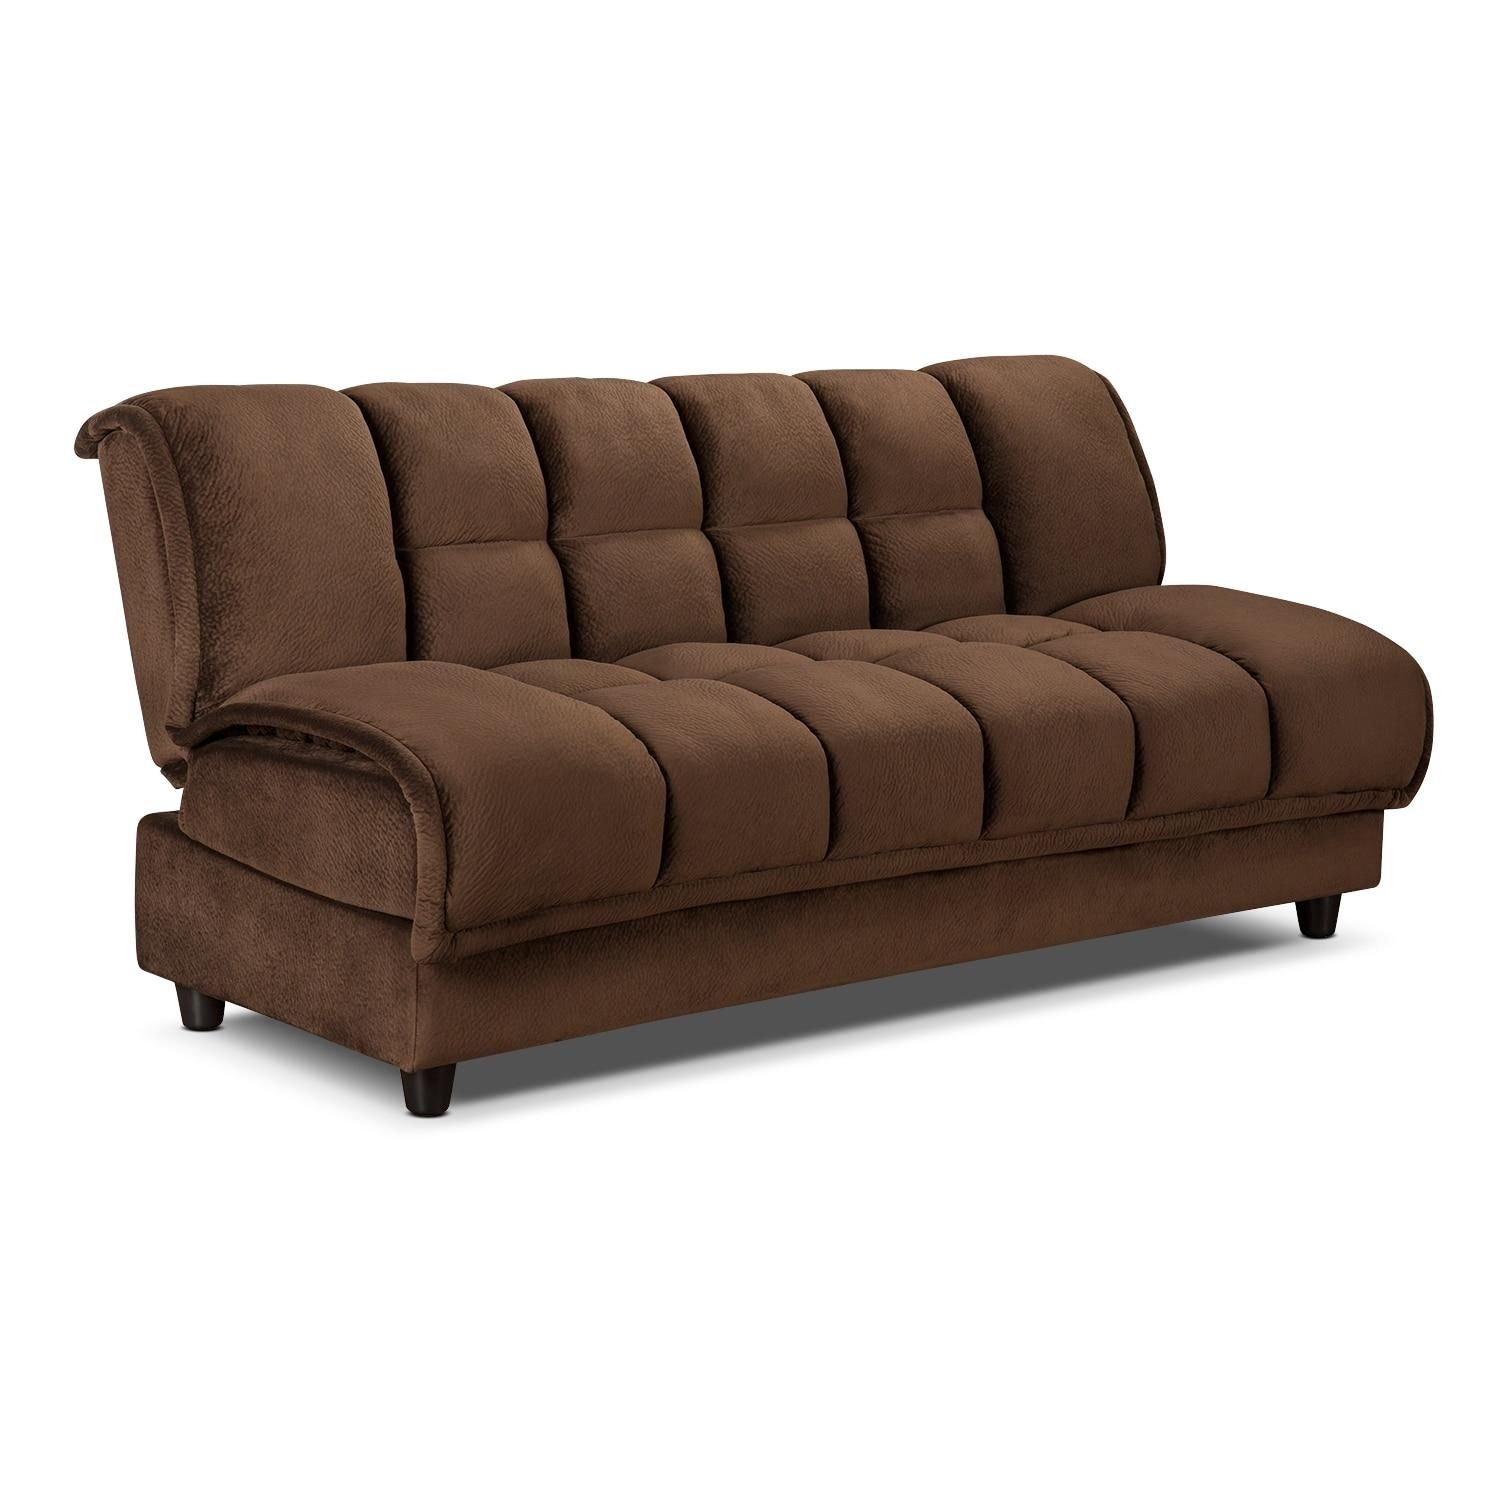 Sleeper Sofas | Value City Furniture | Value City Furniture Intended For Sofa Beds Chairs (View 2 of 20)